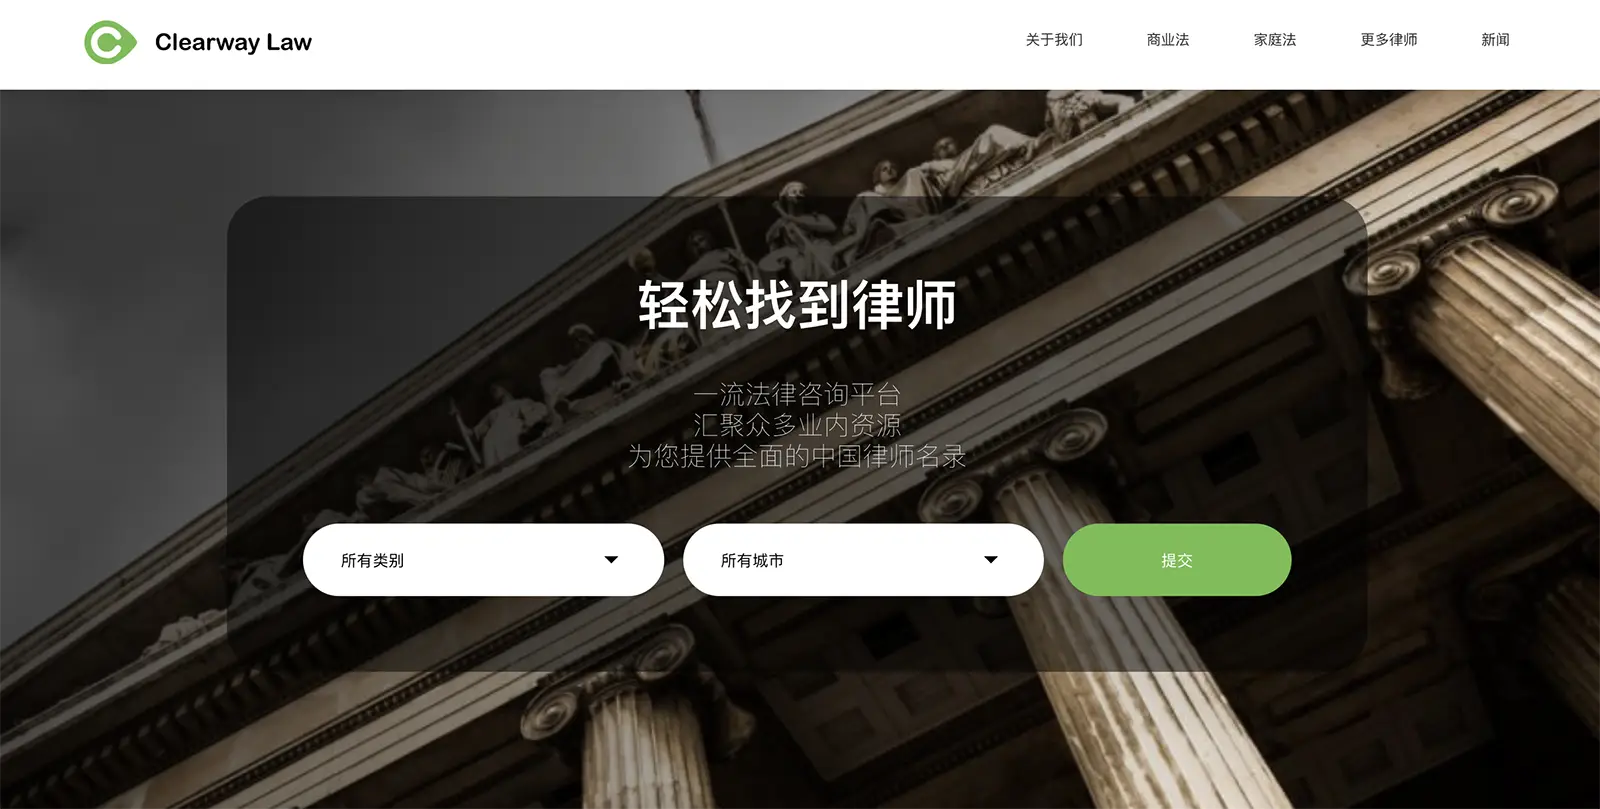 Clearway law china case study